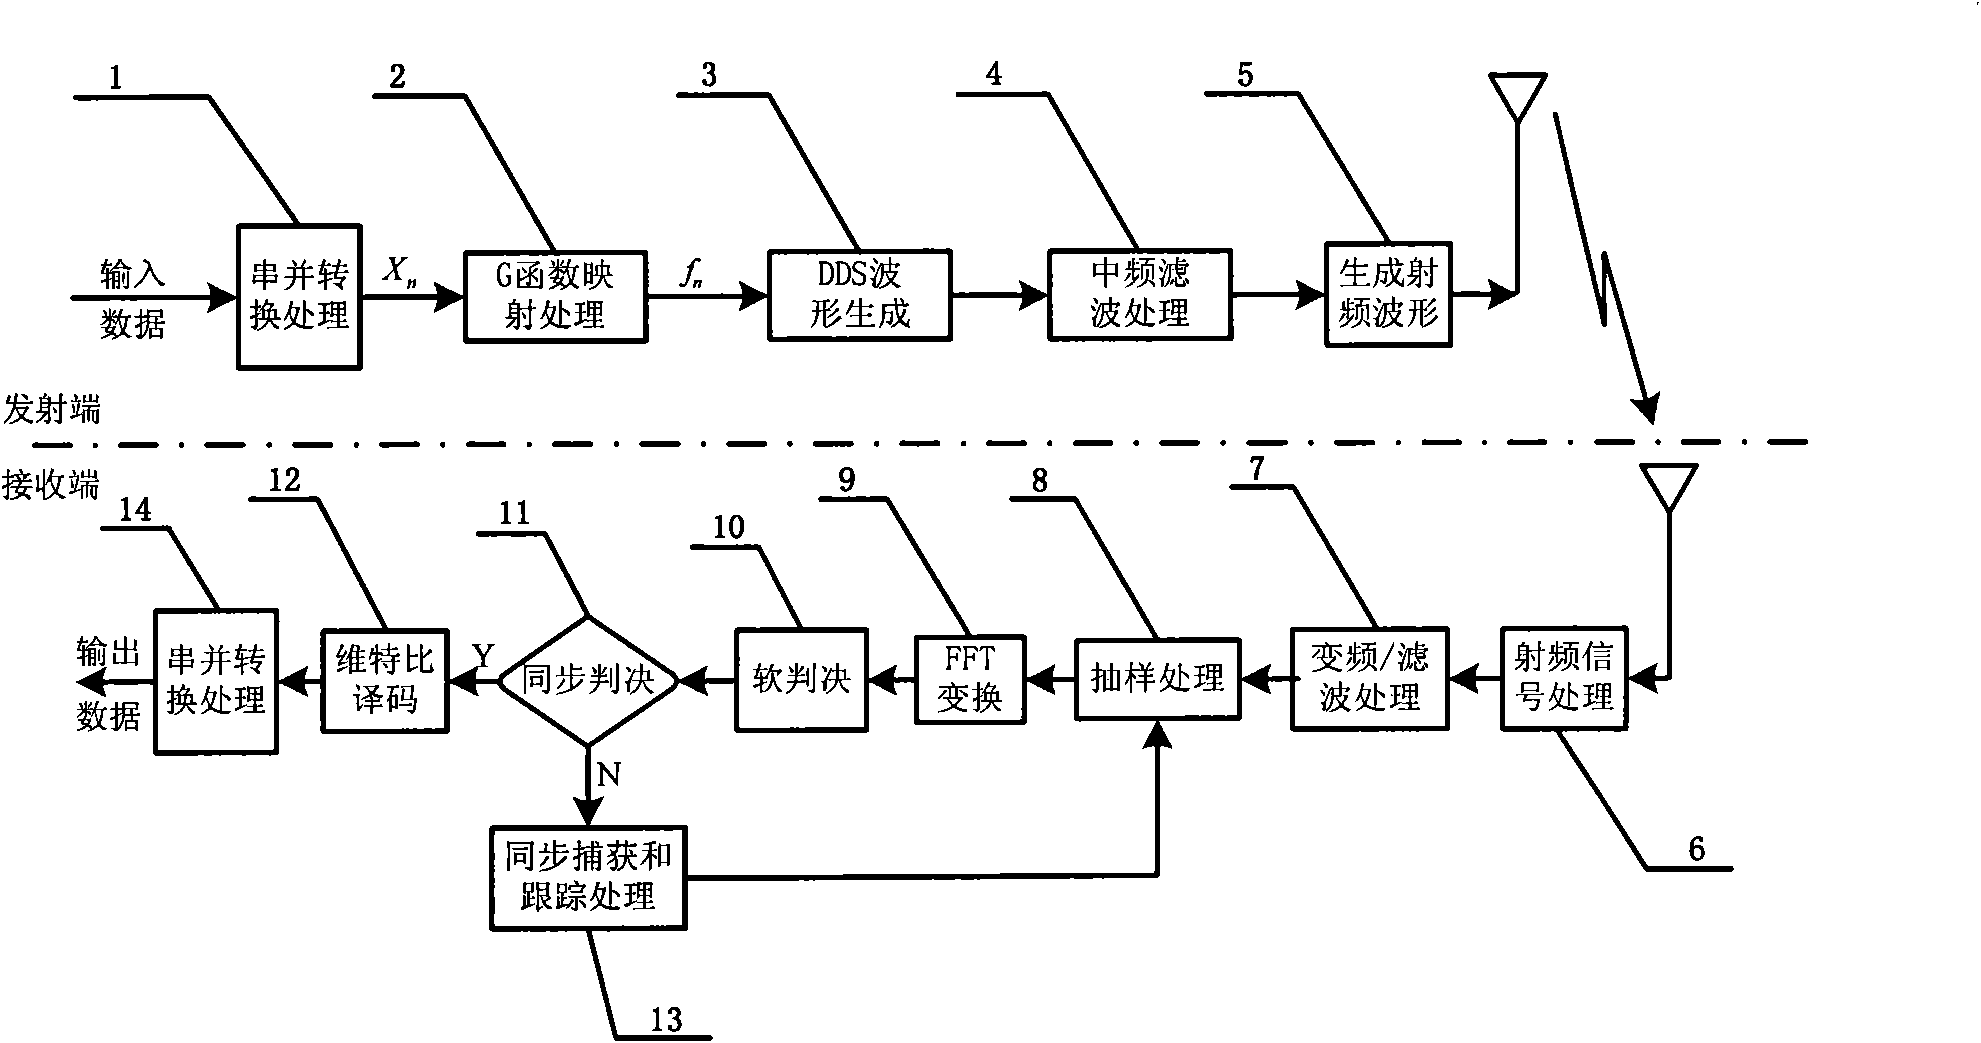 High-density differential frequency hopping communication method